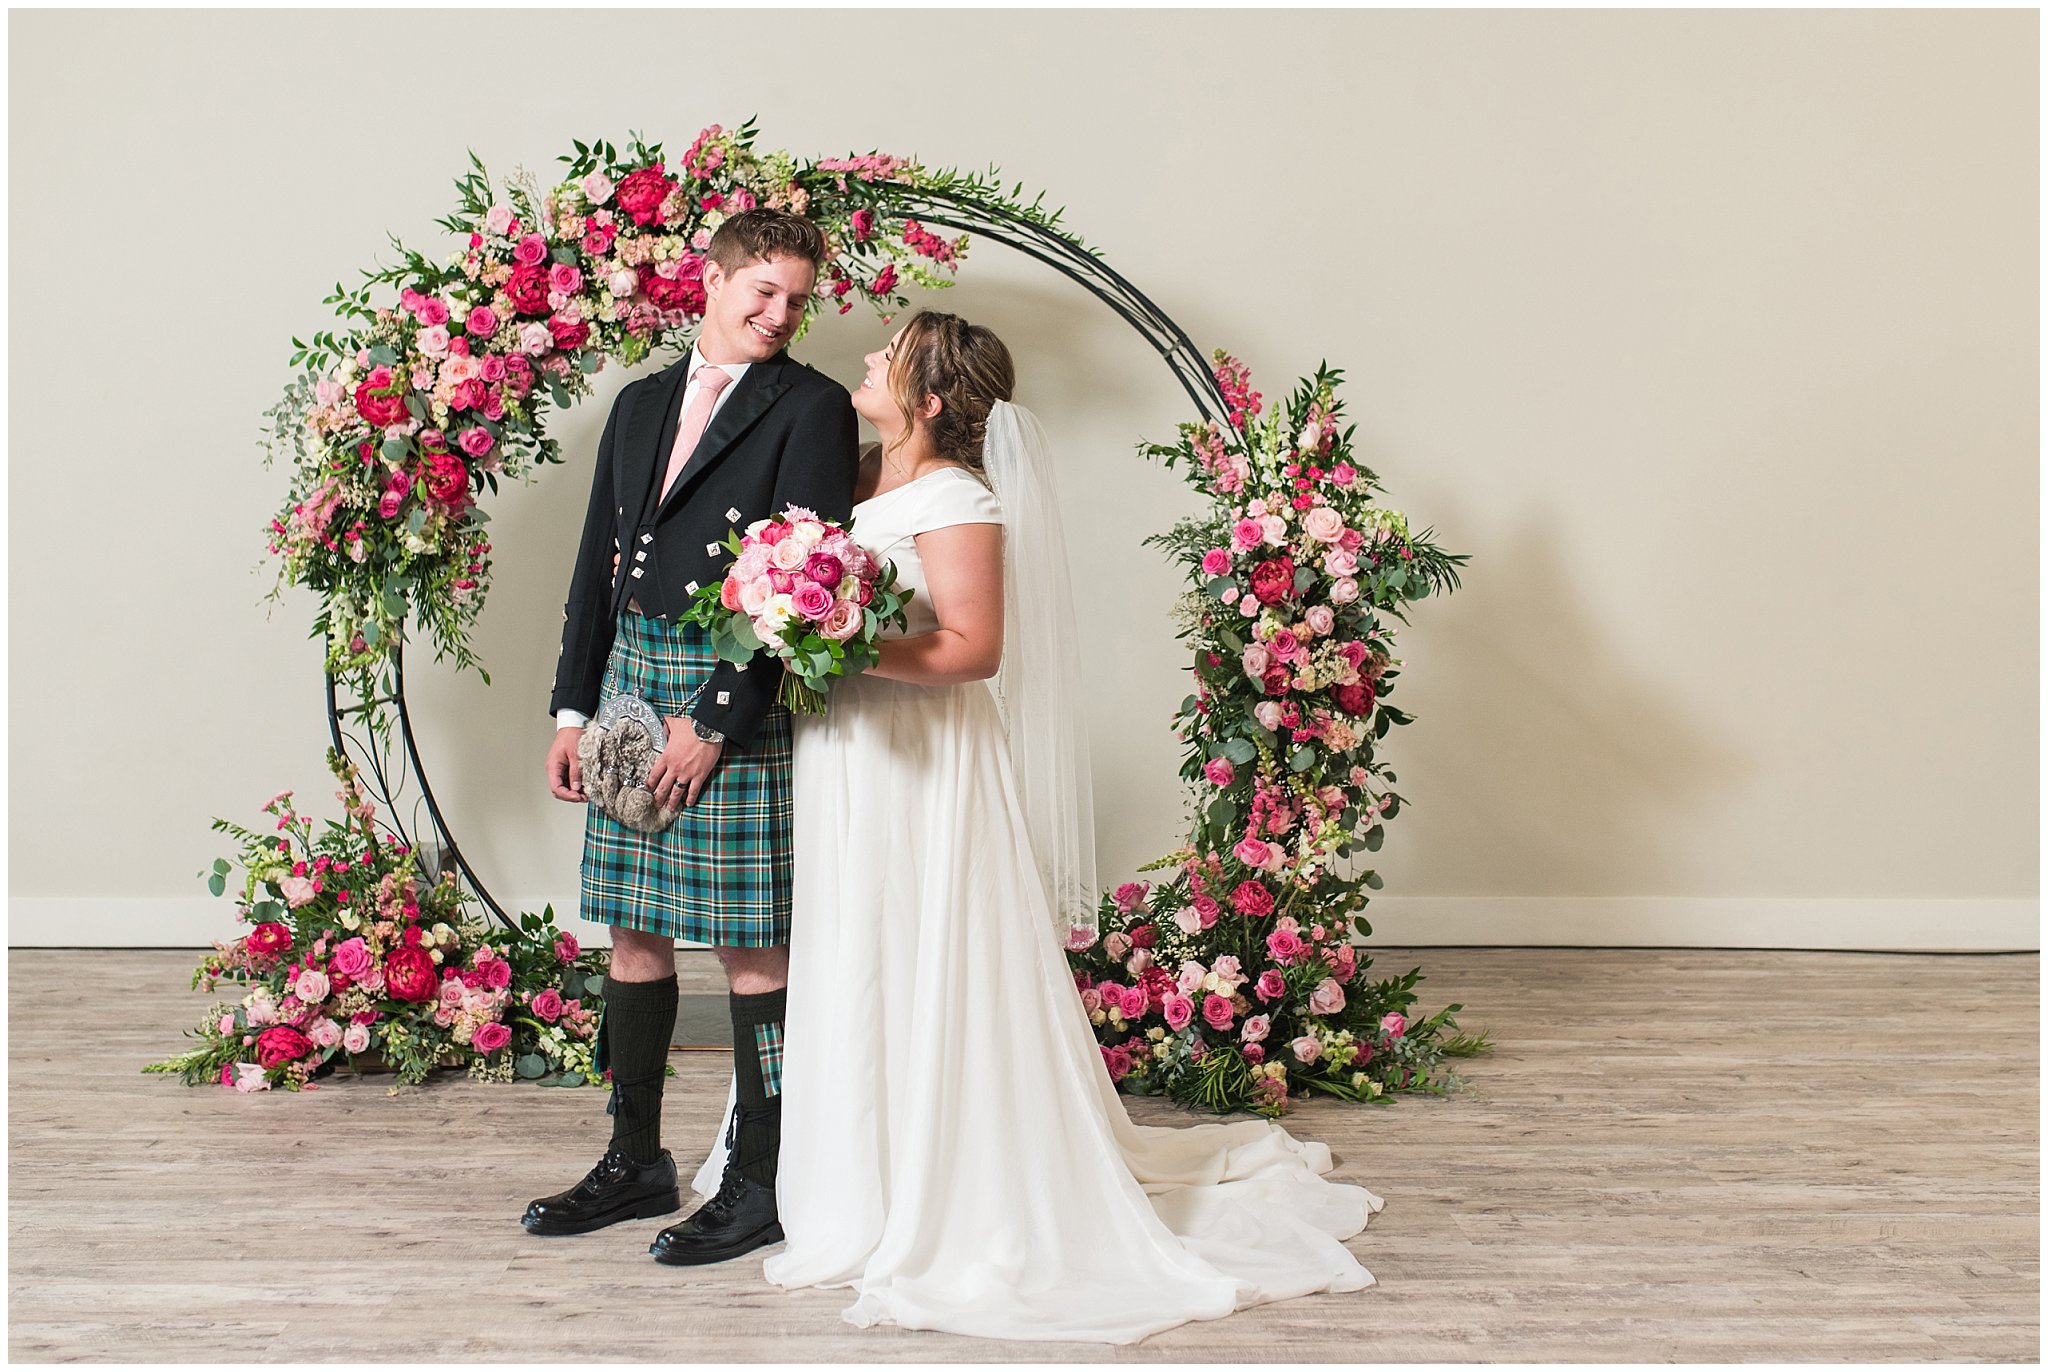 Bride and Groom in front of floral arch in shades of pink wearing flowy dress and highland attire with kilt | Talia Event Center Summer Wedding | Jessie and Dallin Photography